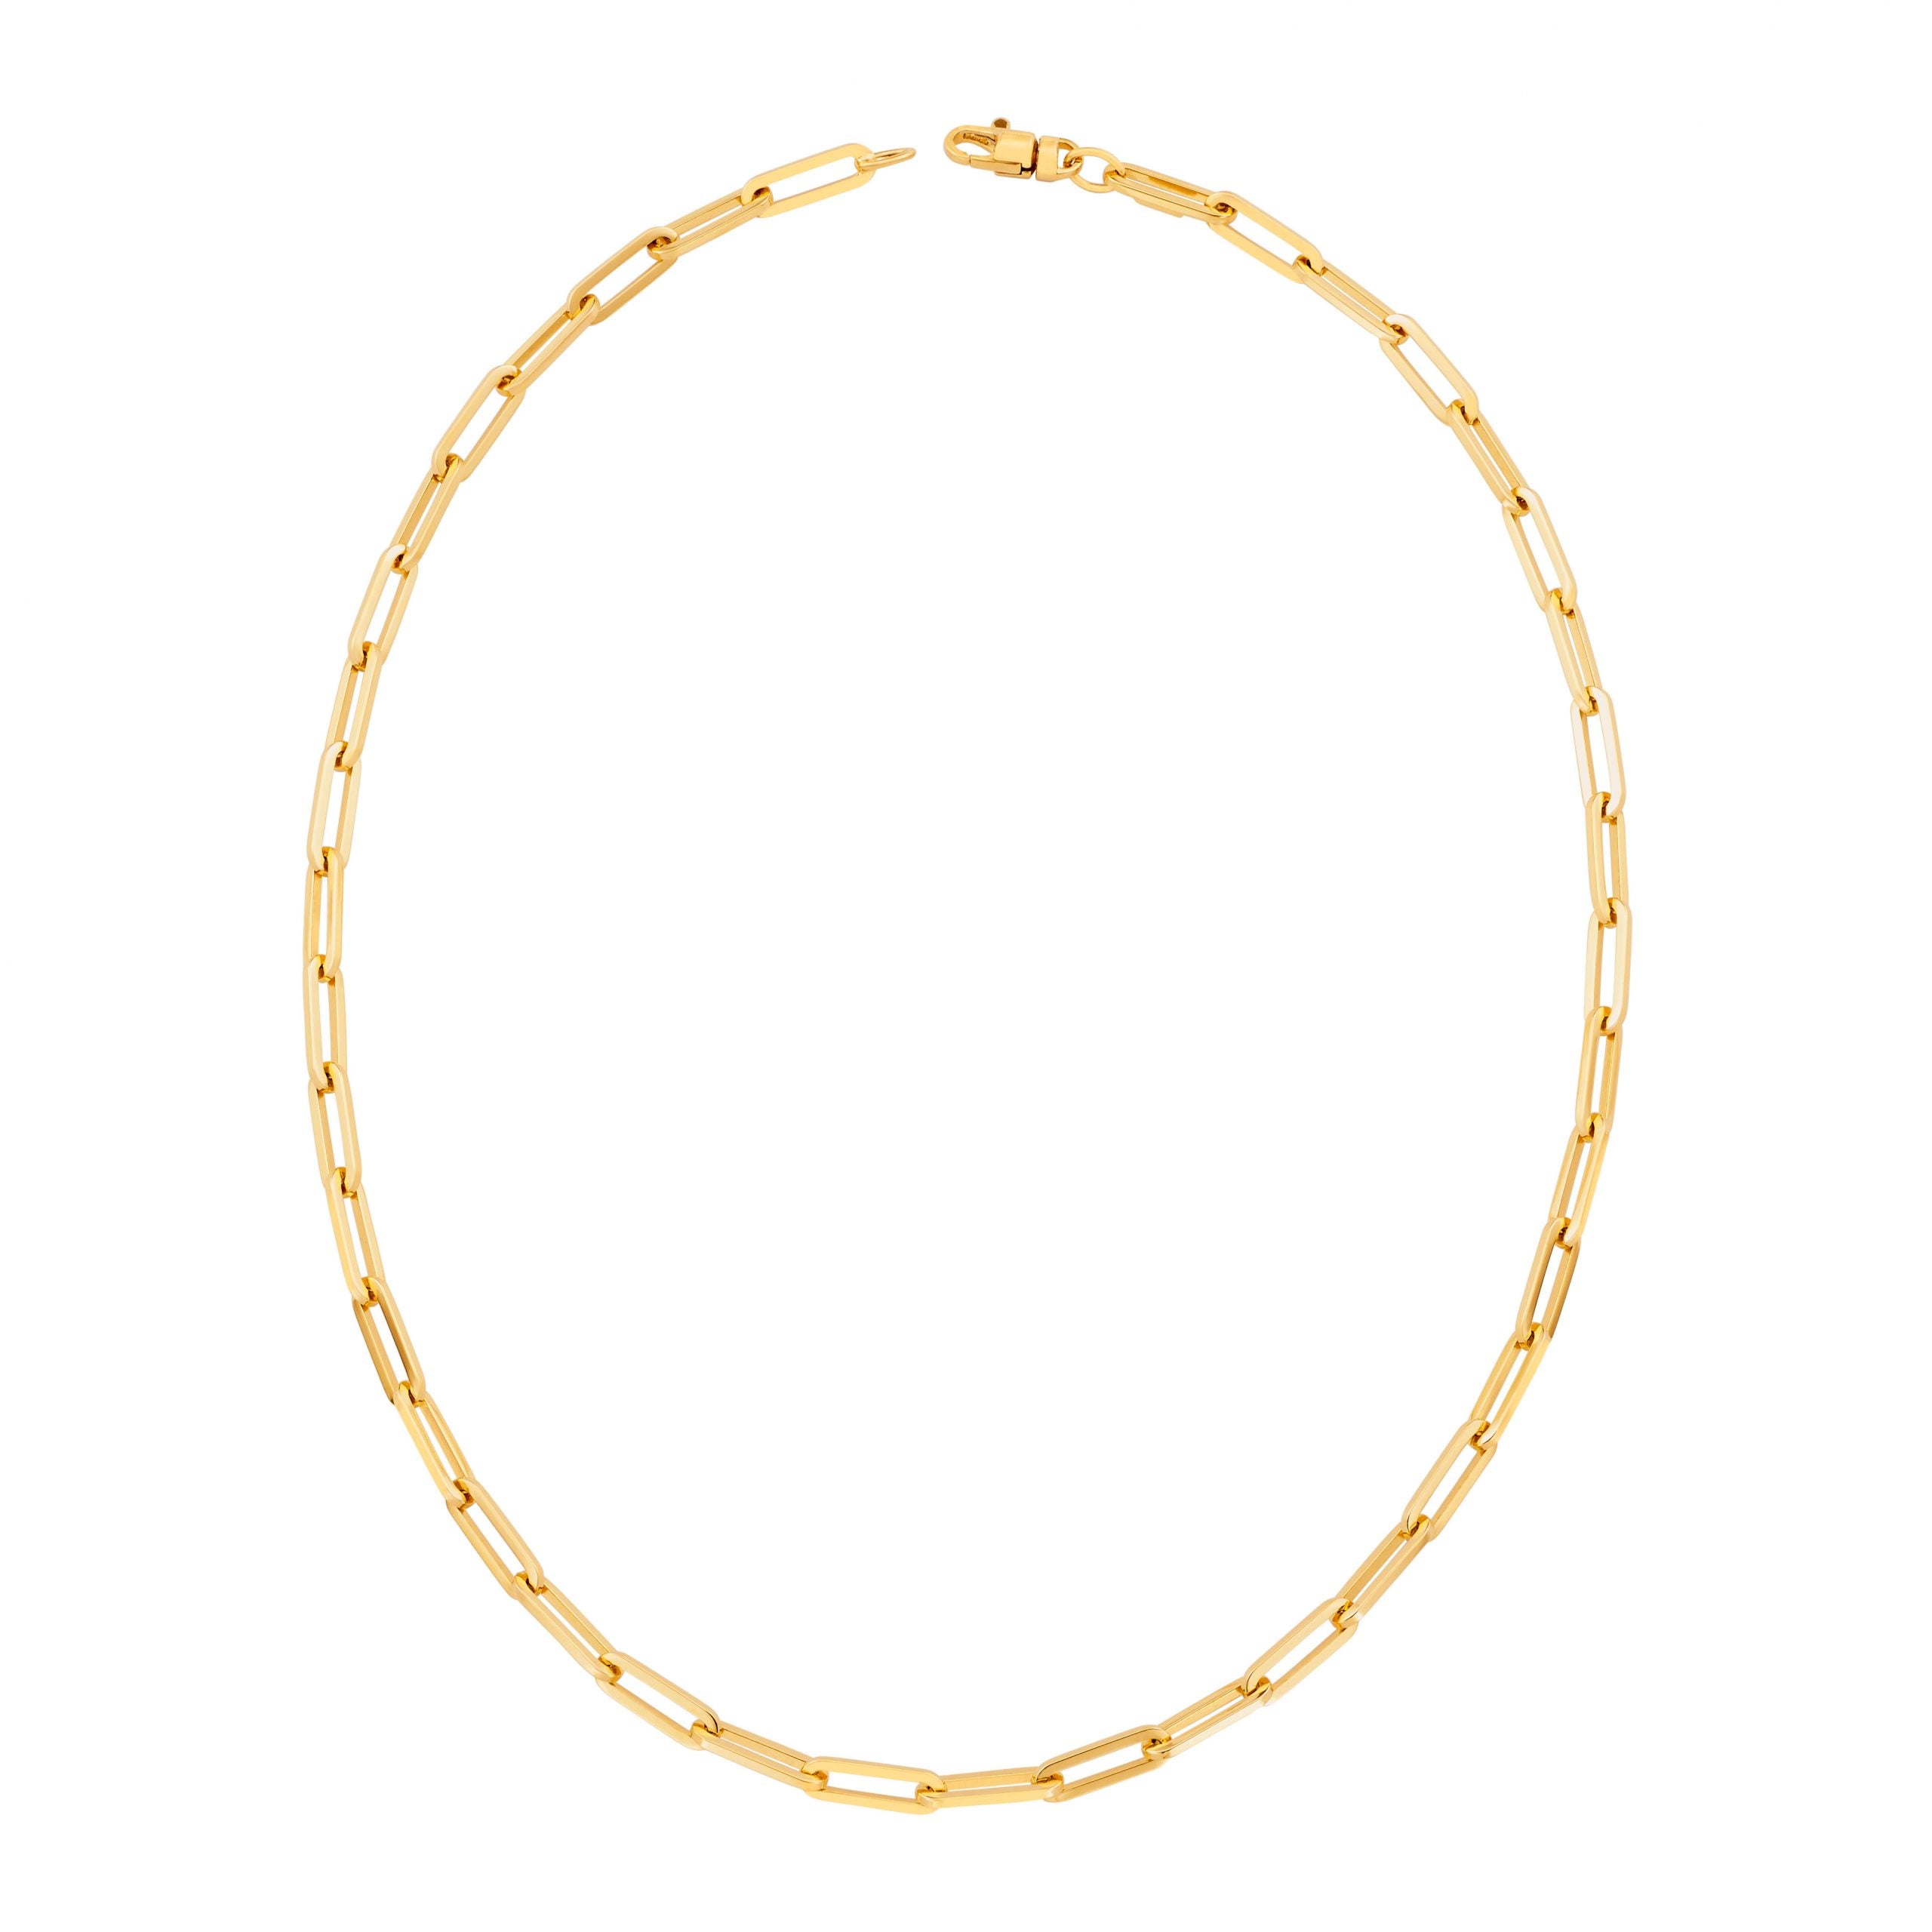 HERCO 14K YELLOW GOLD ITALIAN PAPERCLIP CHAIN 18 INCHES